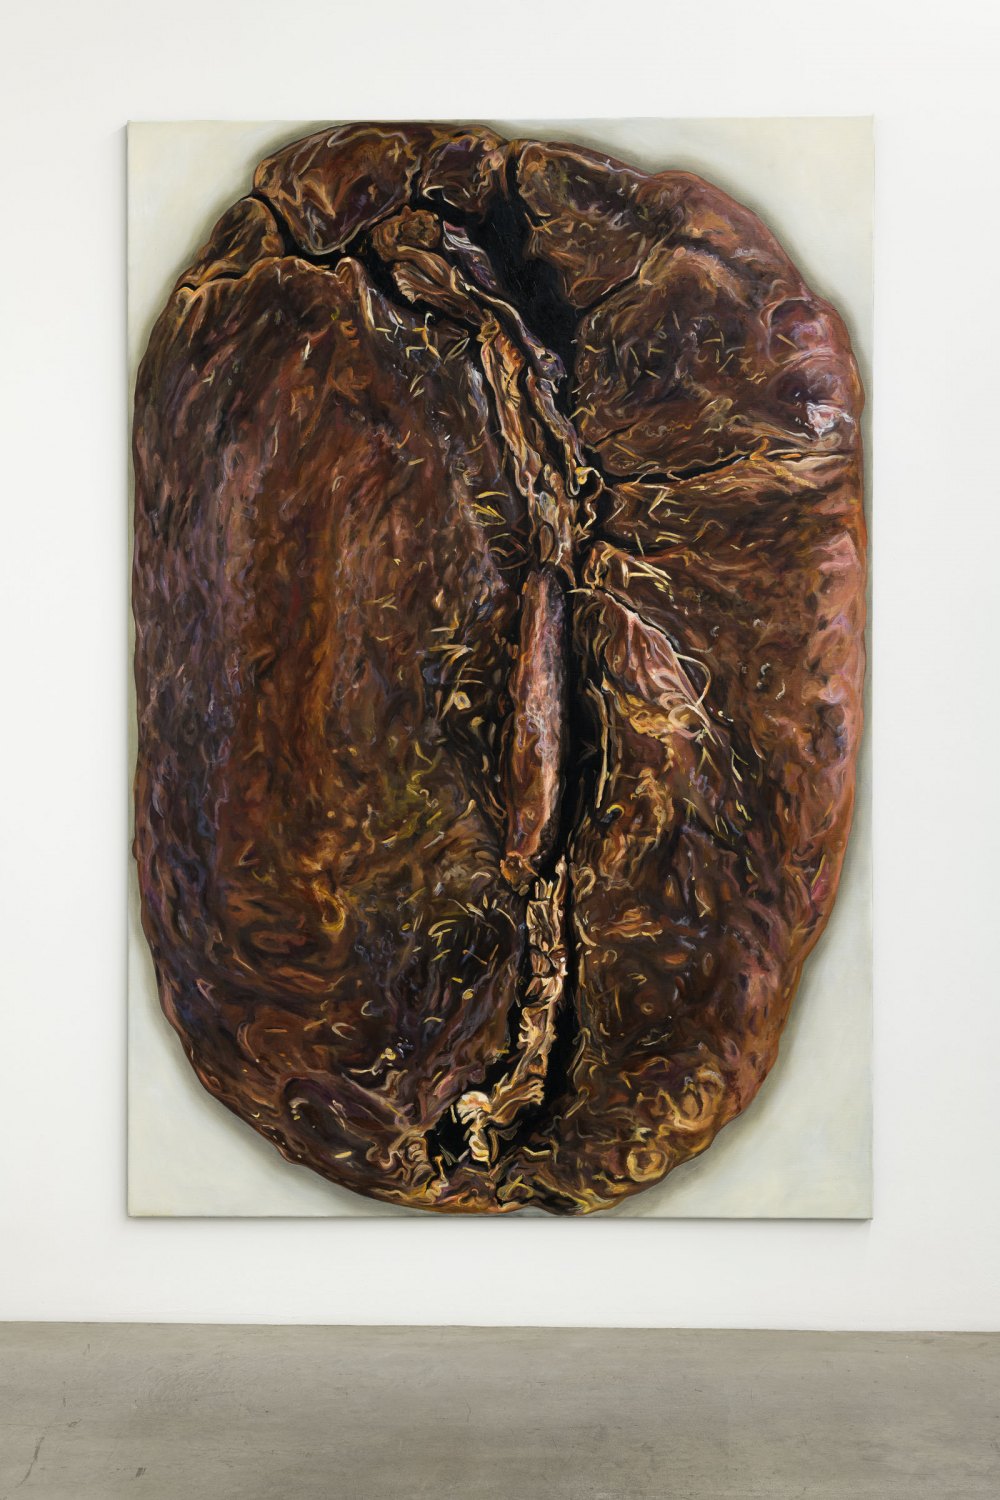 Jana Euler Coffee bean - Where the energy comes from 3, 2023  Oil on canvas  280 x 190 cm  